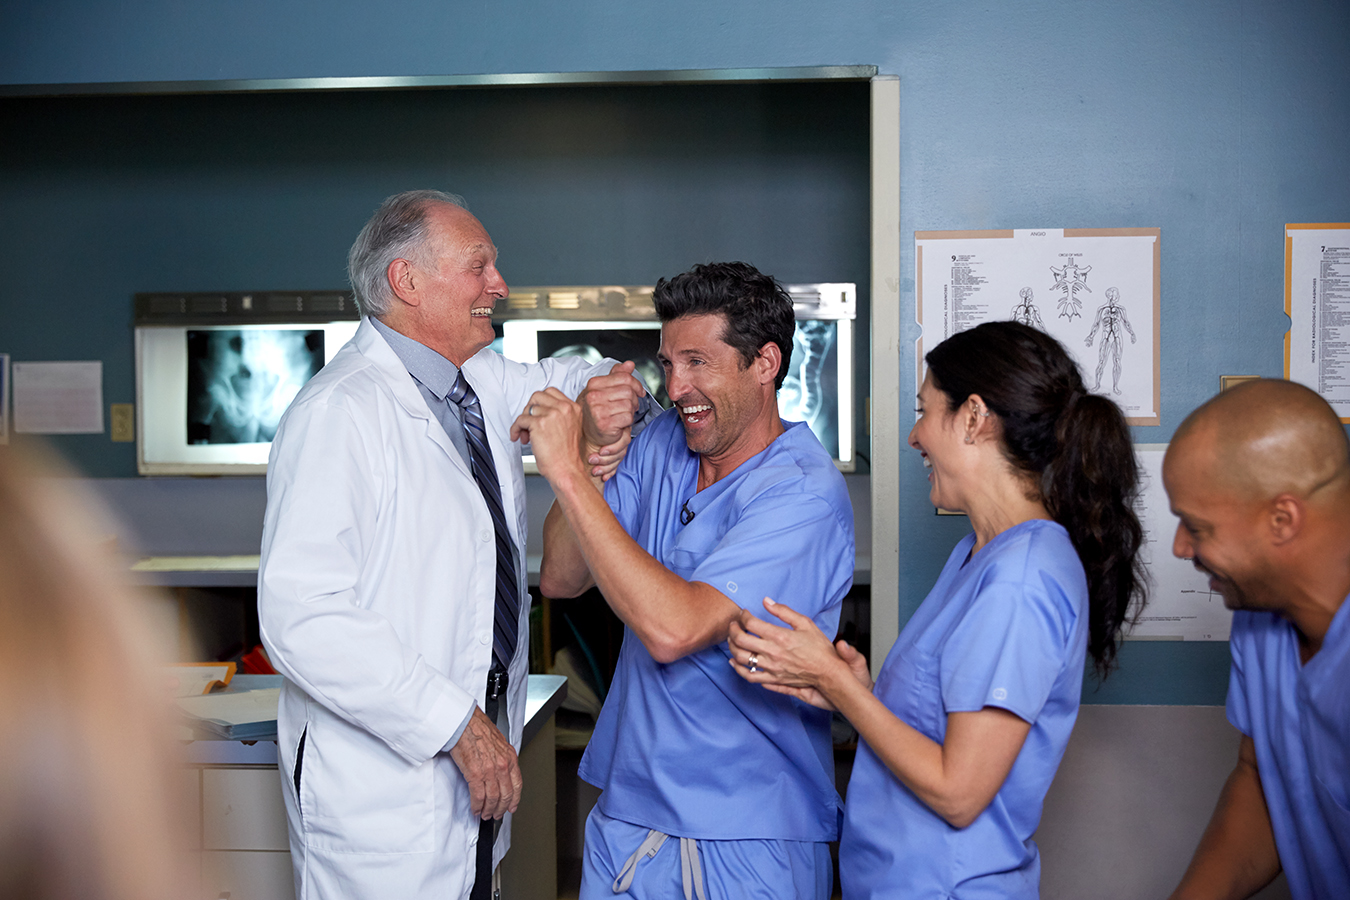 backstage photo of TV doctors laughing